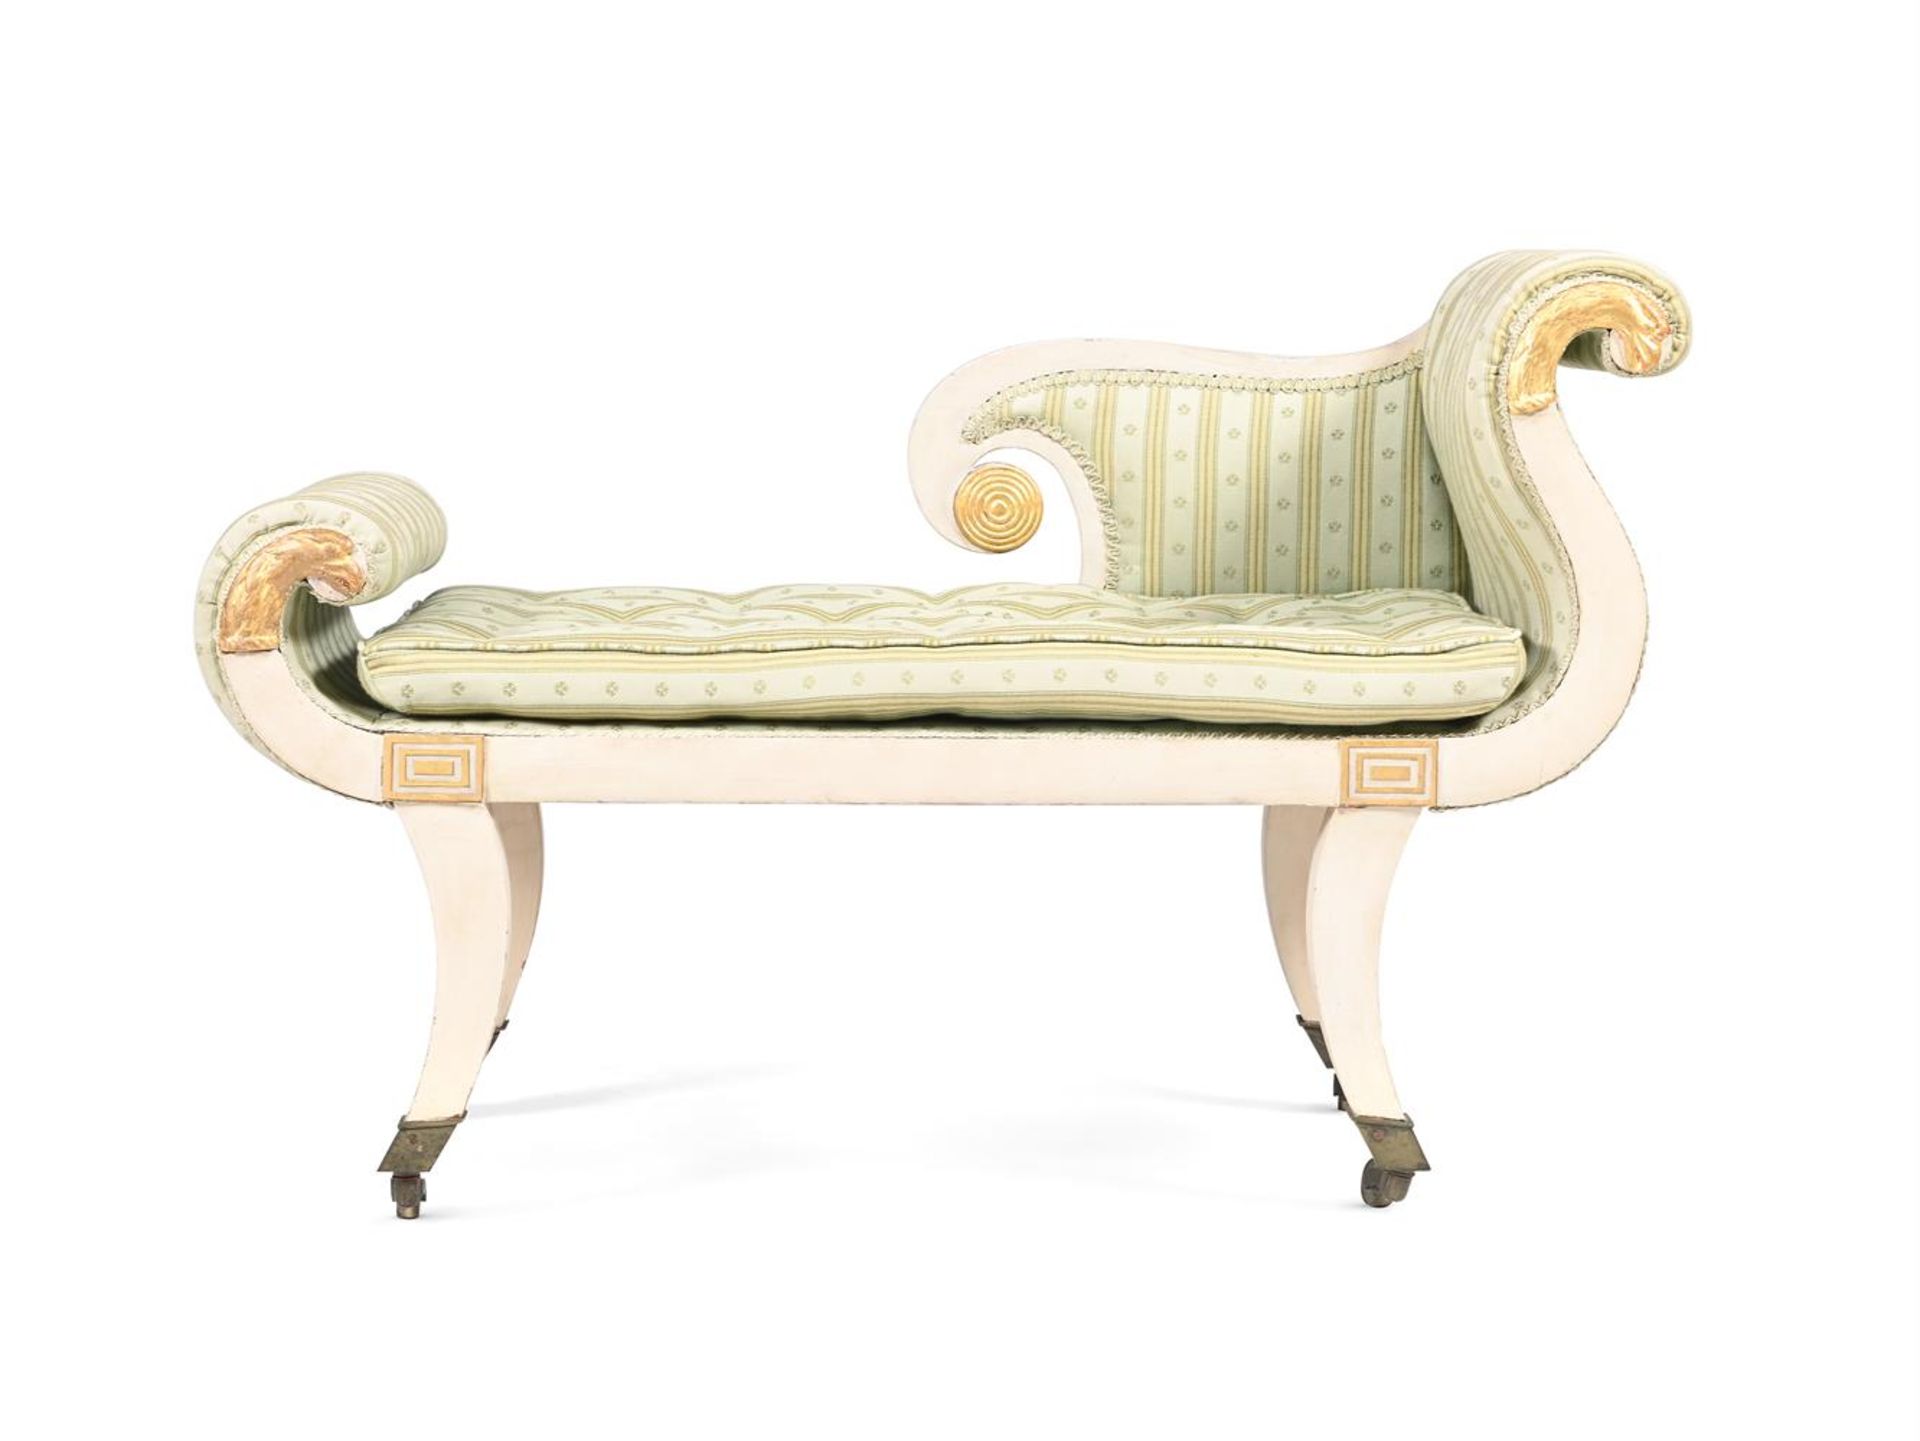 A REGENCY CREAM PAINTED AND PARCEL GILT WINDOW SEAT, IN THE MANNER OF GILLOWS, CIRCA 1820 - Image 2 of 3